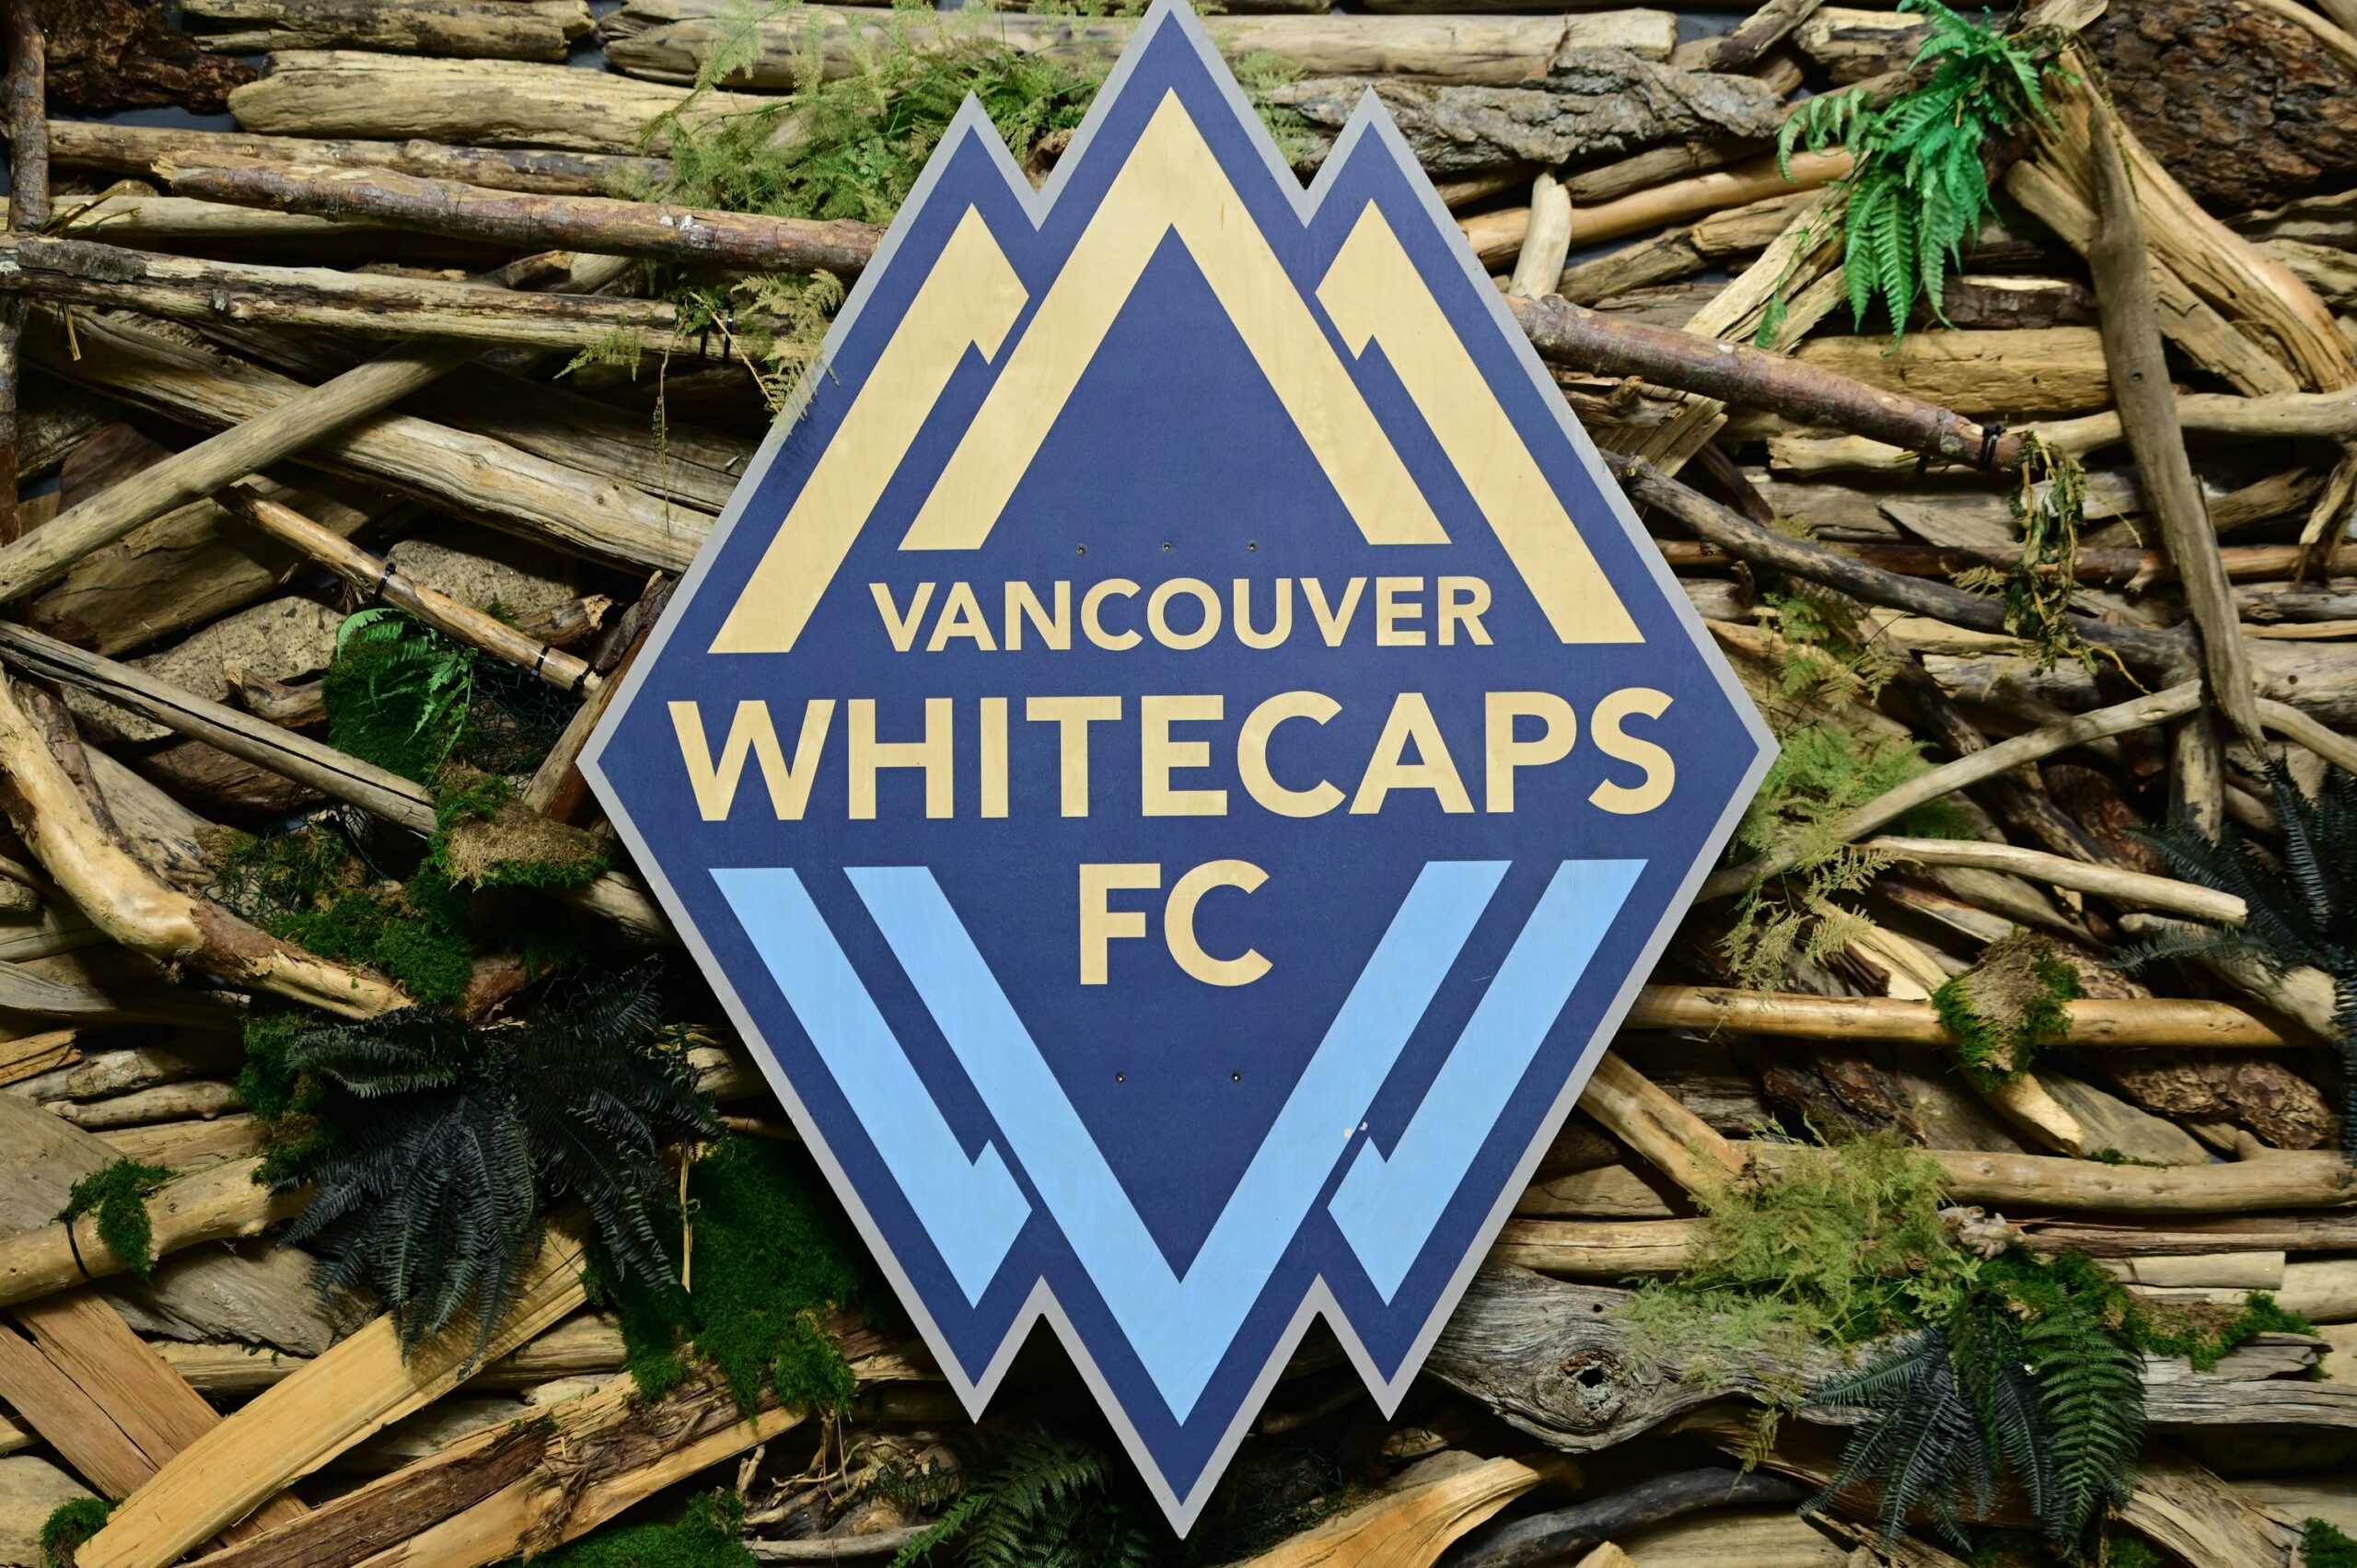 Vancouver Whitecaps FC Will Likely Own One of The Six Project 8 Teams